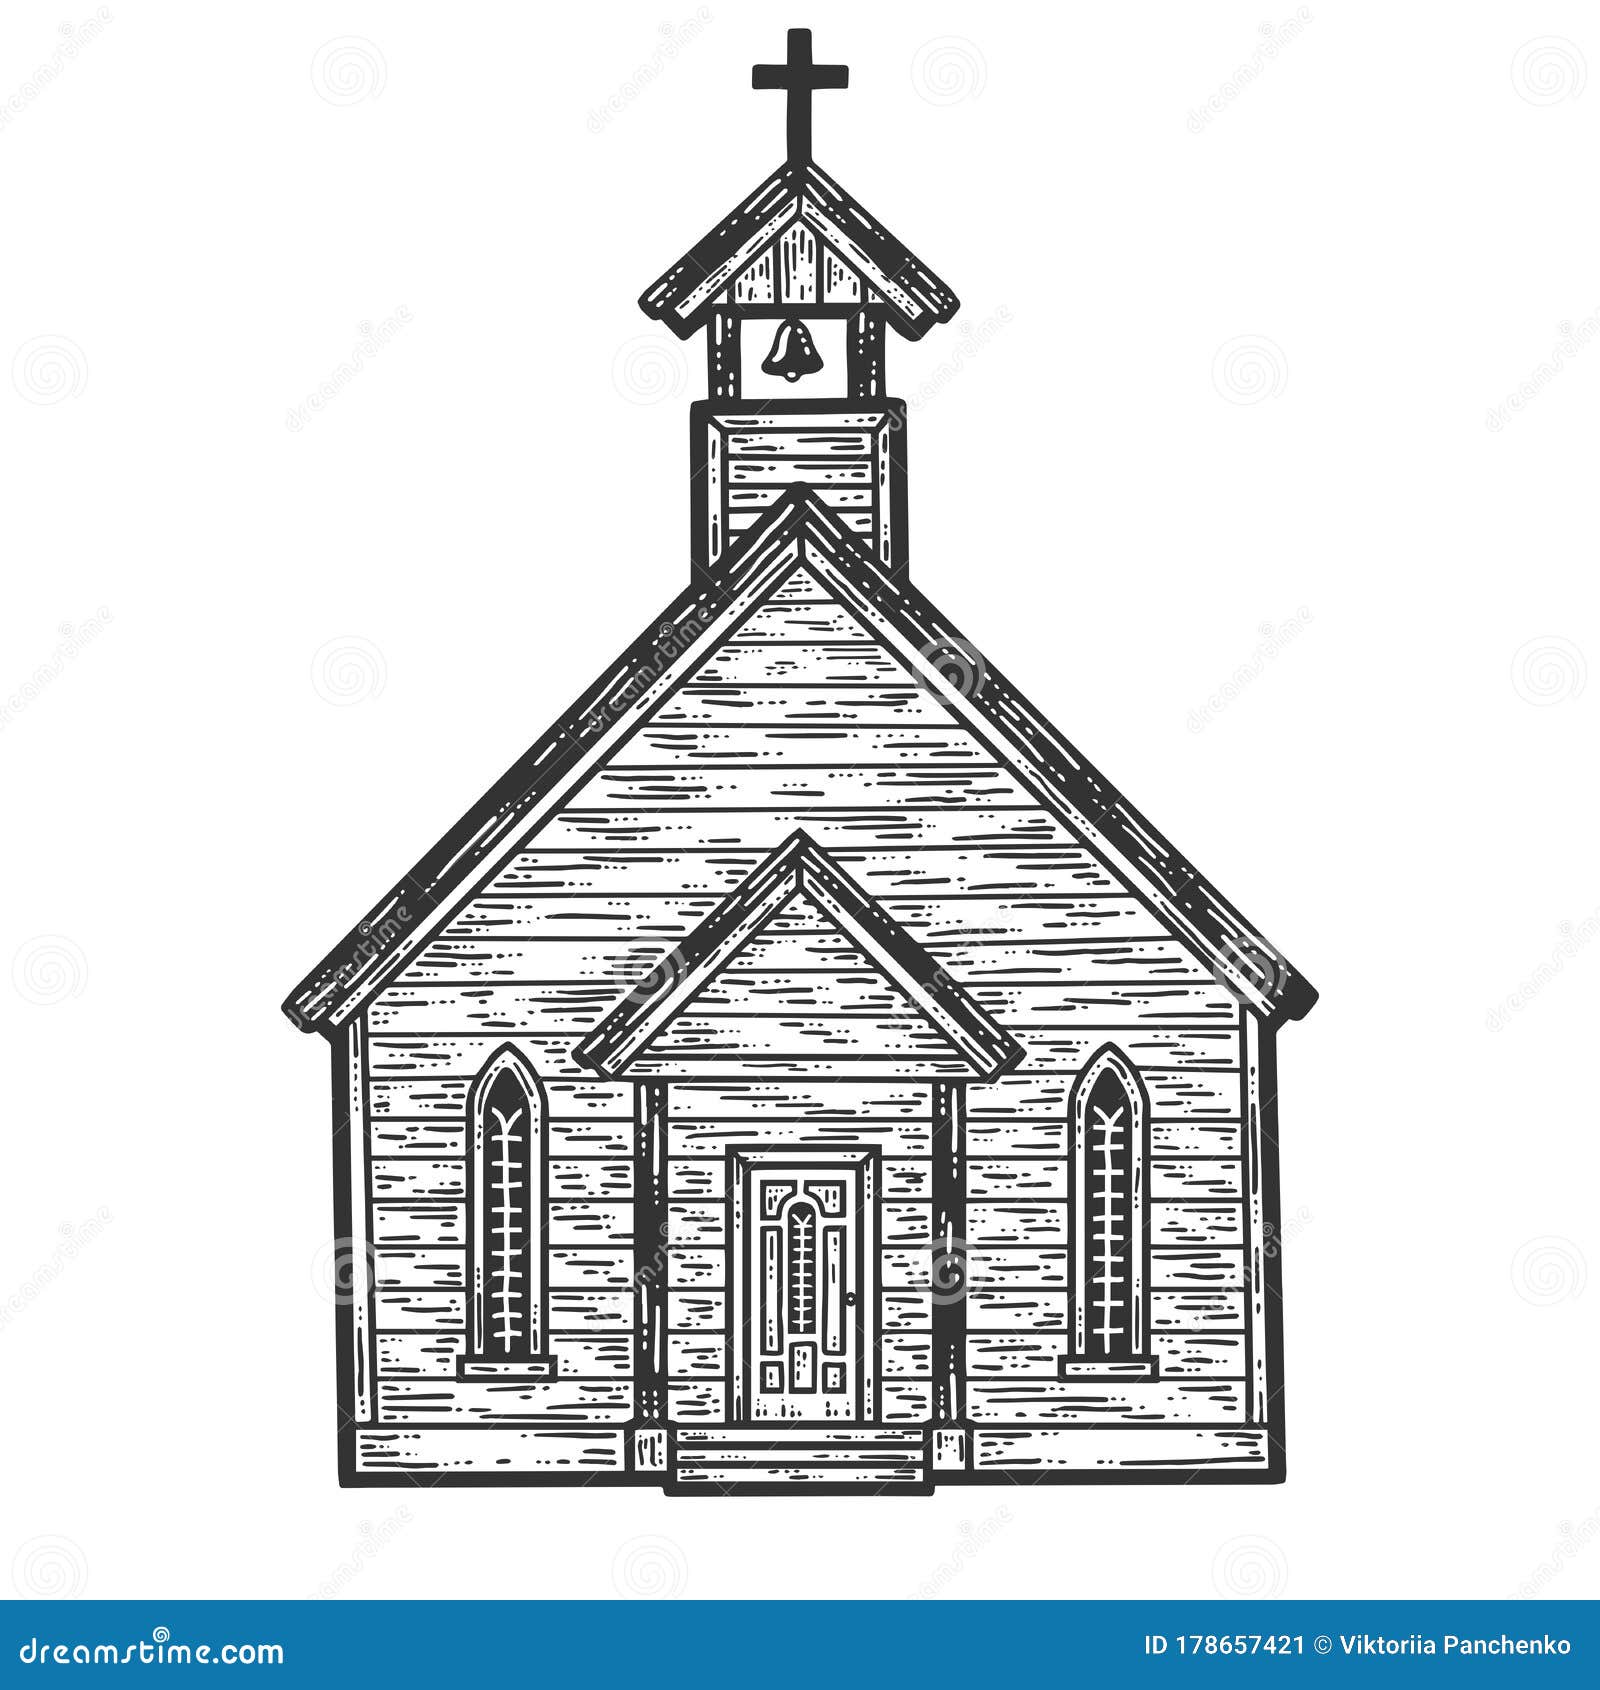 How to Draw CHURCH EASY STEP BY STEP - YouTube